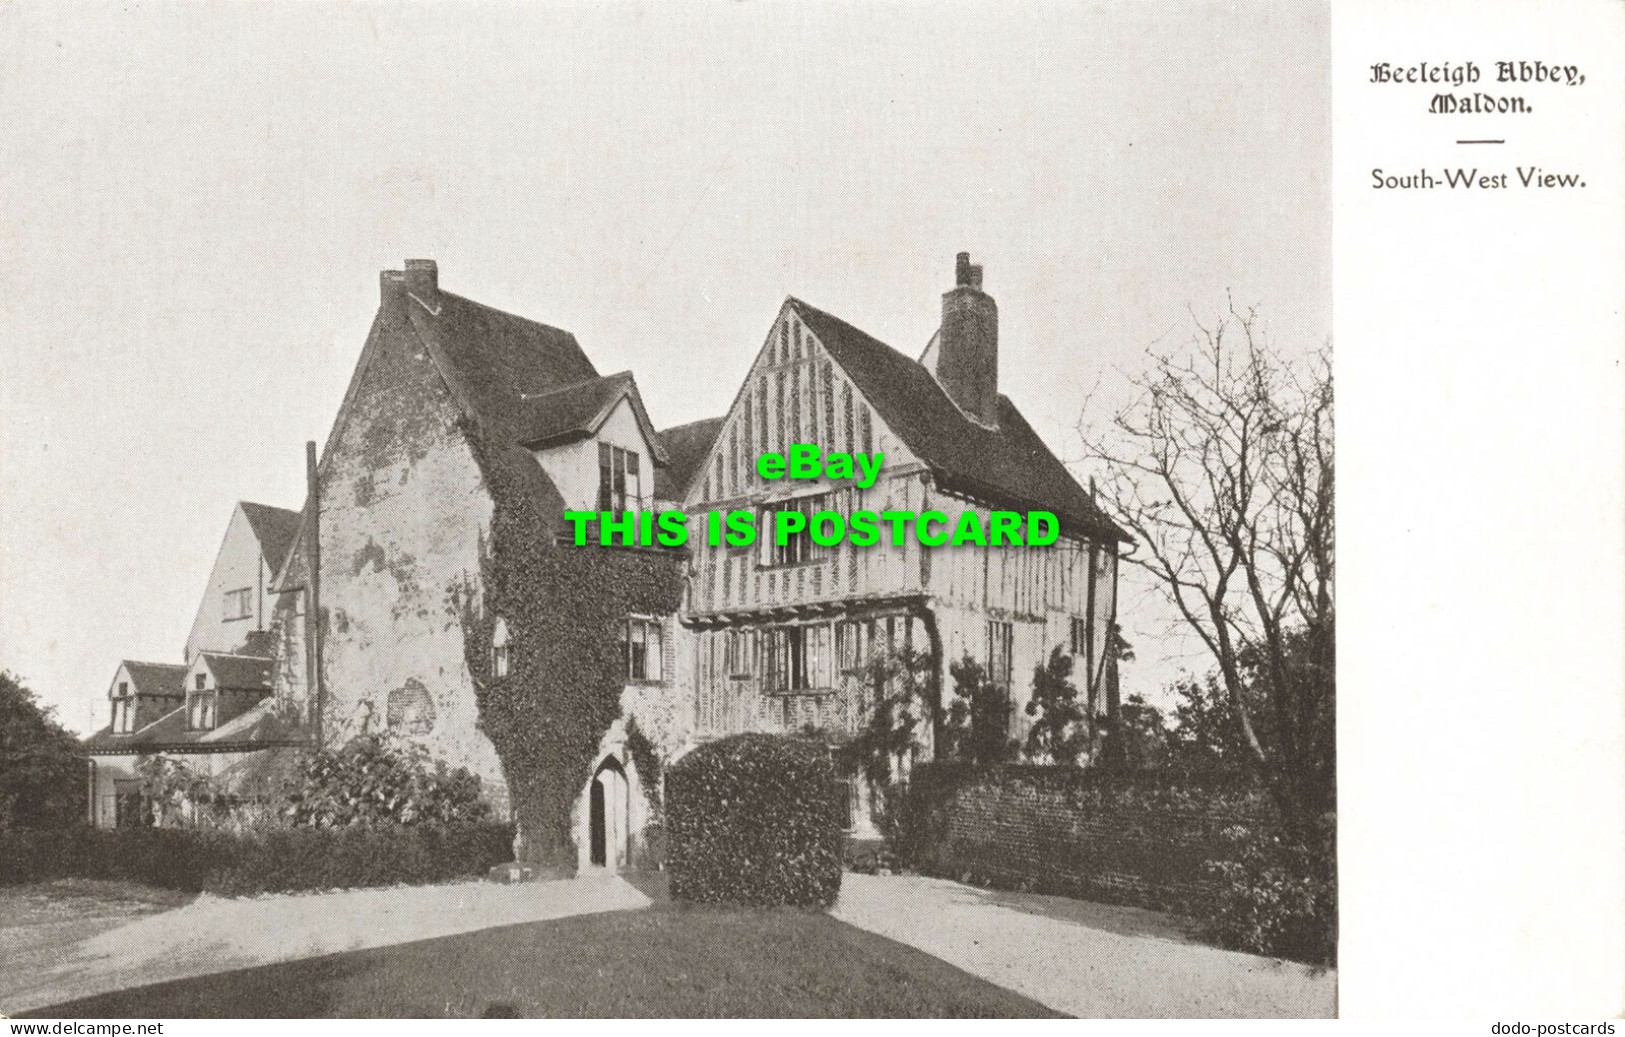 R598756 Maldon. Beeleigh Abbey. South West View - World